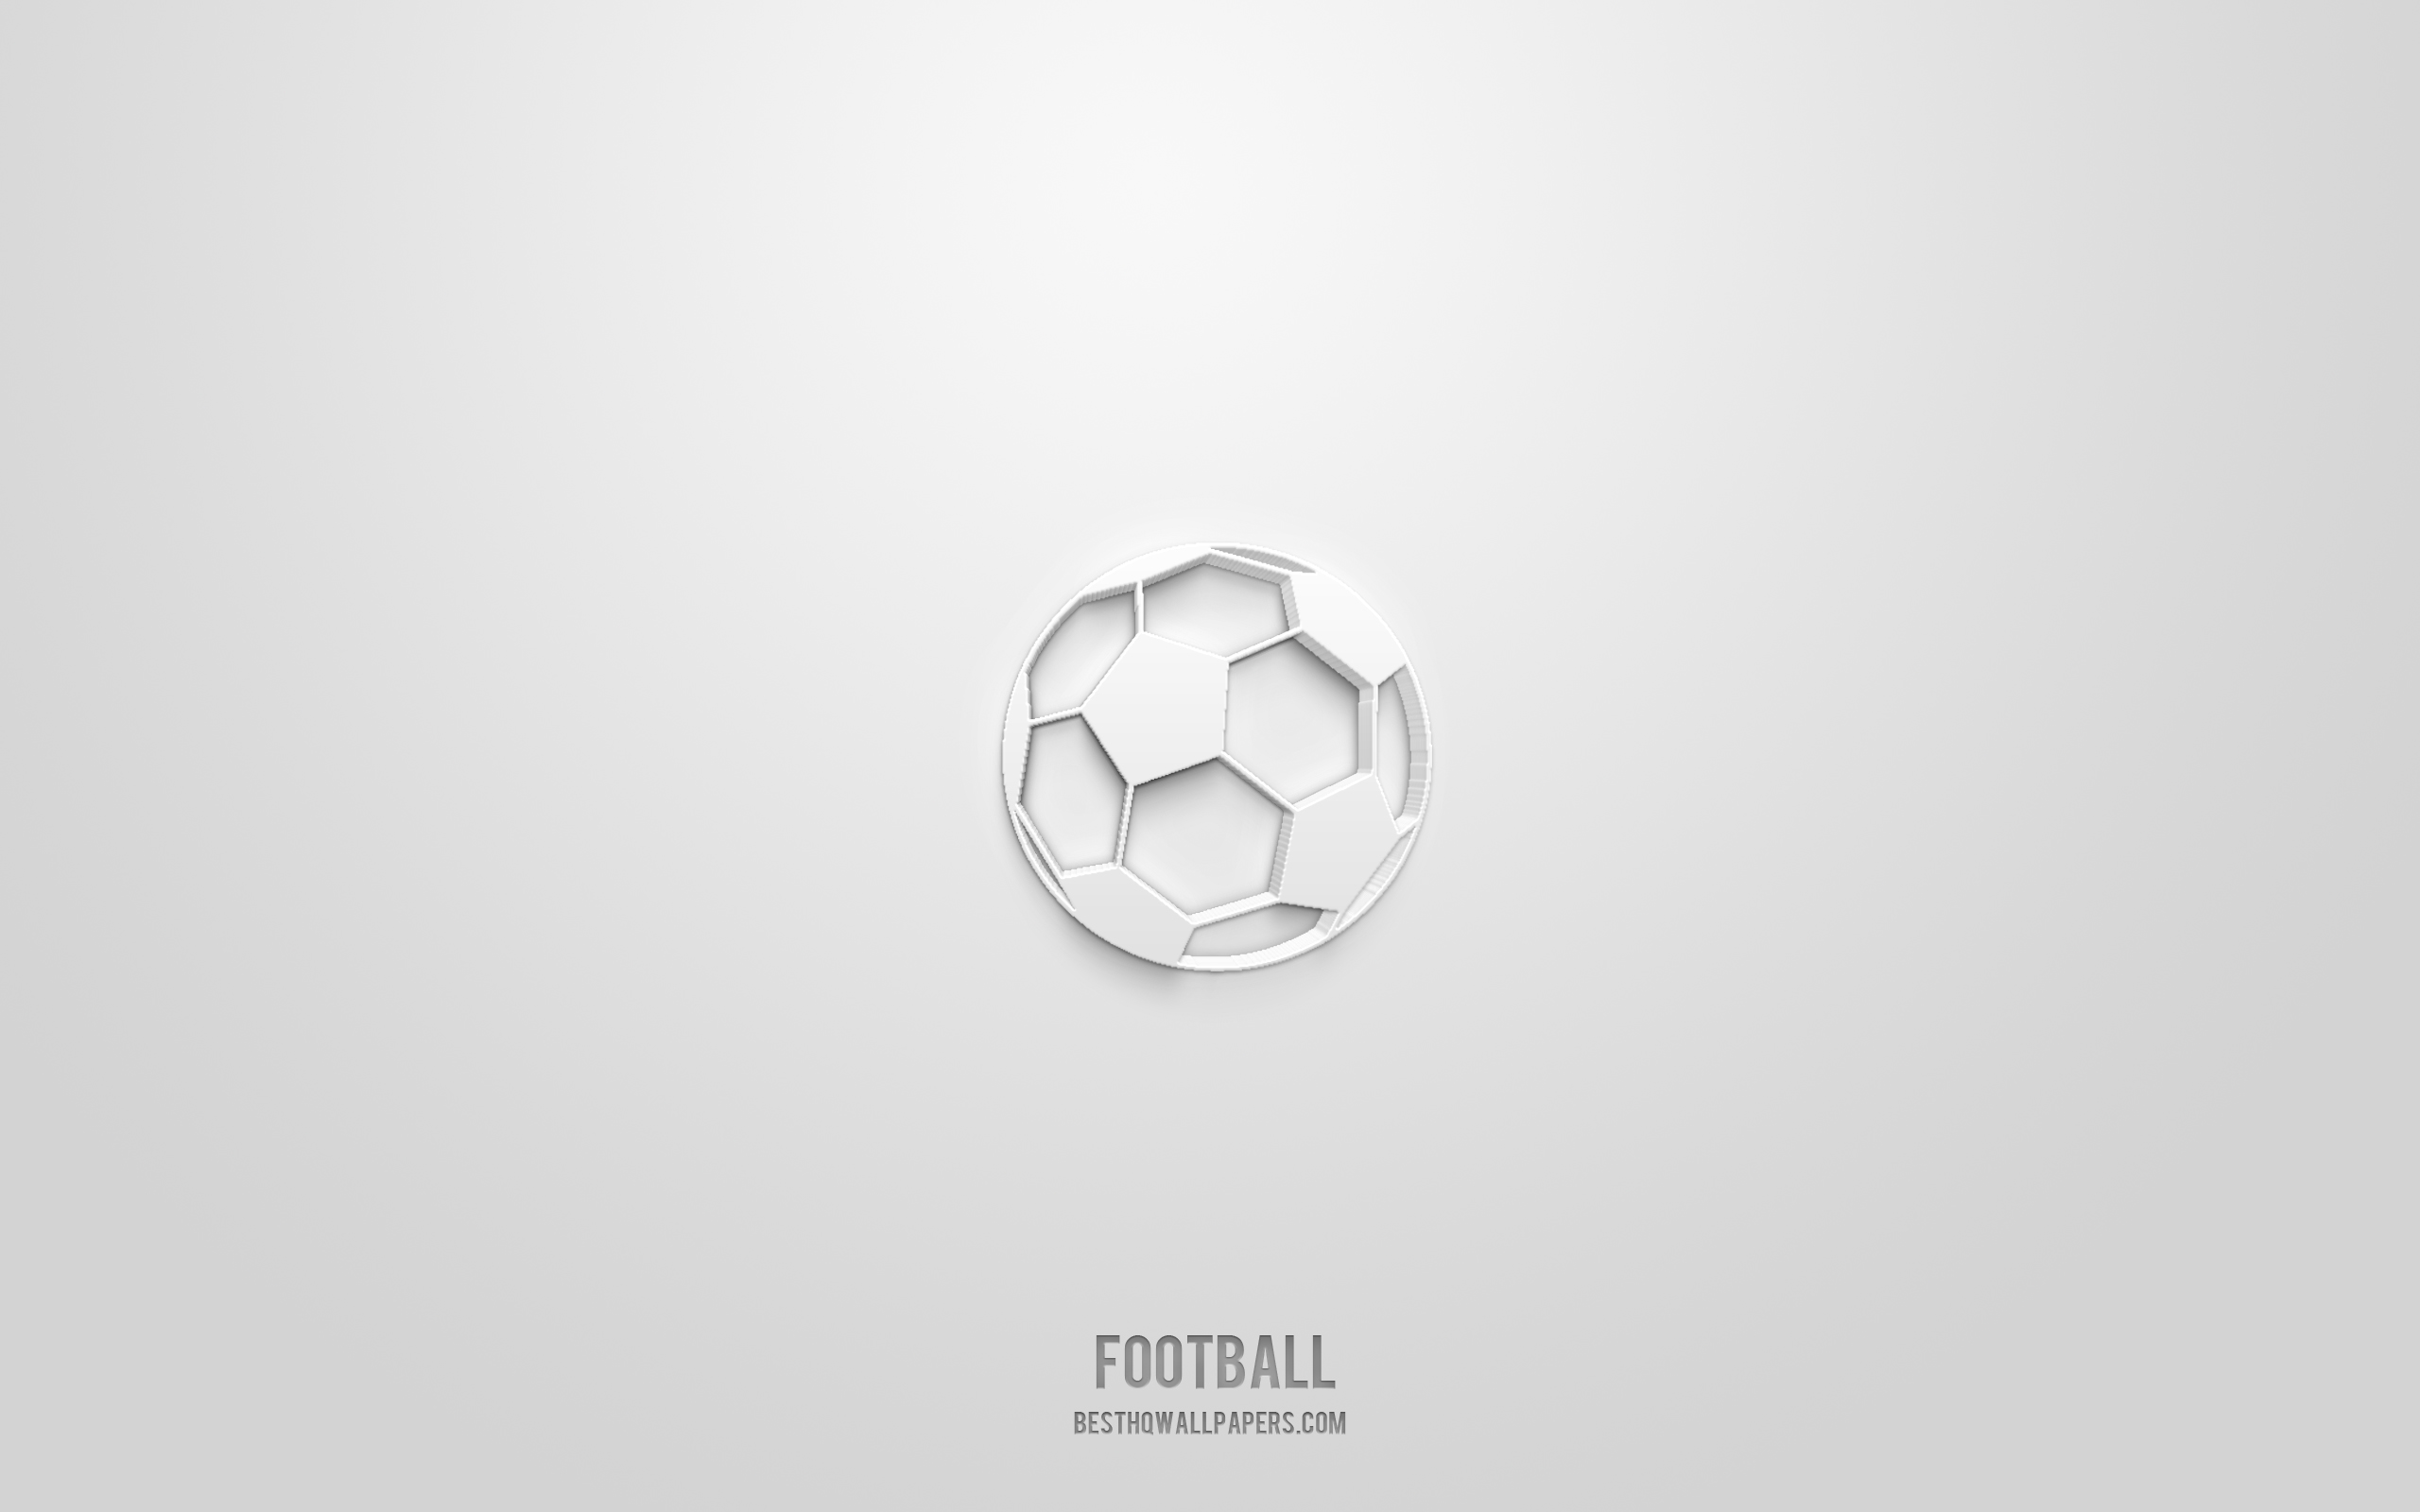 Download wallpaper football 3D icon, white background, 3D symbols, football, sport icons, 3D icons, football sign, sport 3D icons for desktop with resolution 2560x1600. High Quality HD picture wallpaper